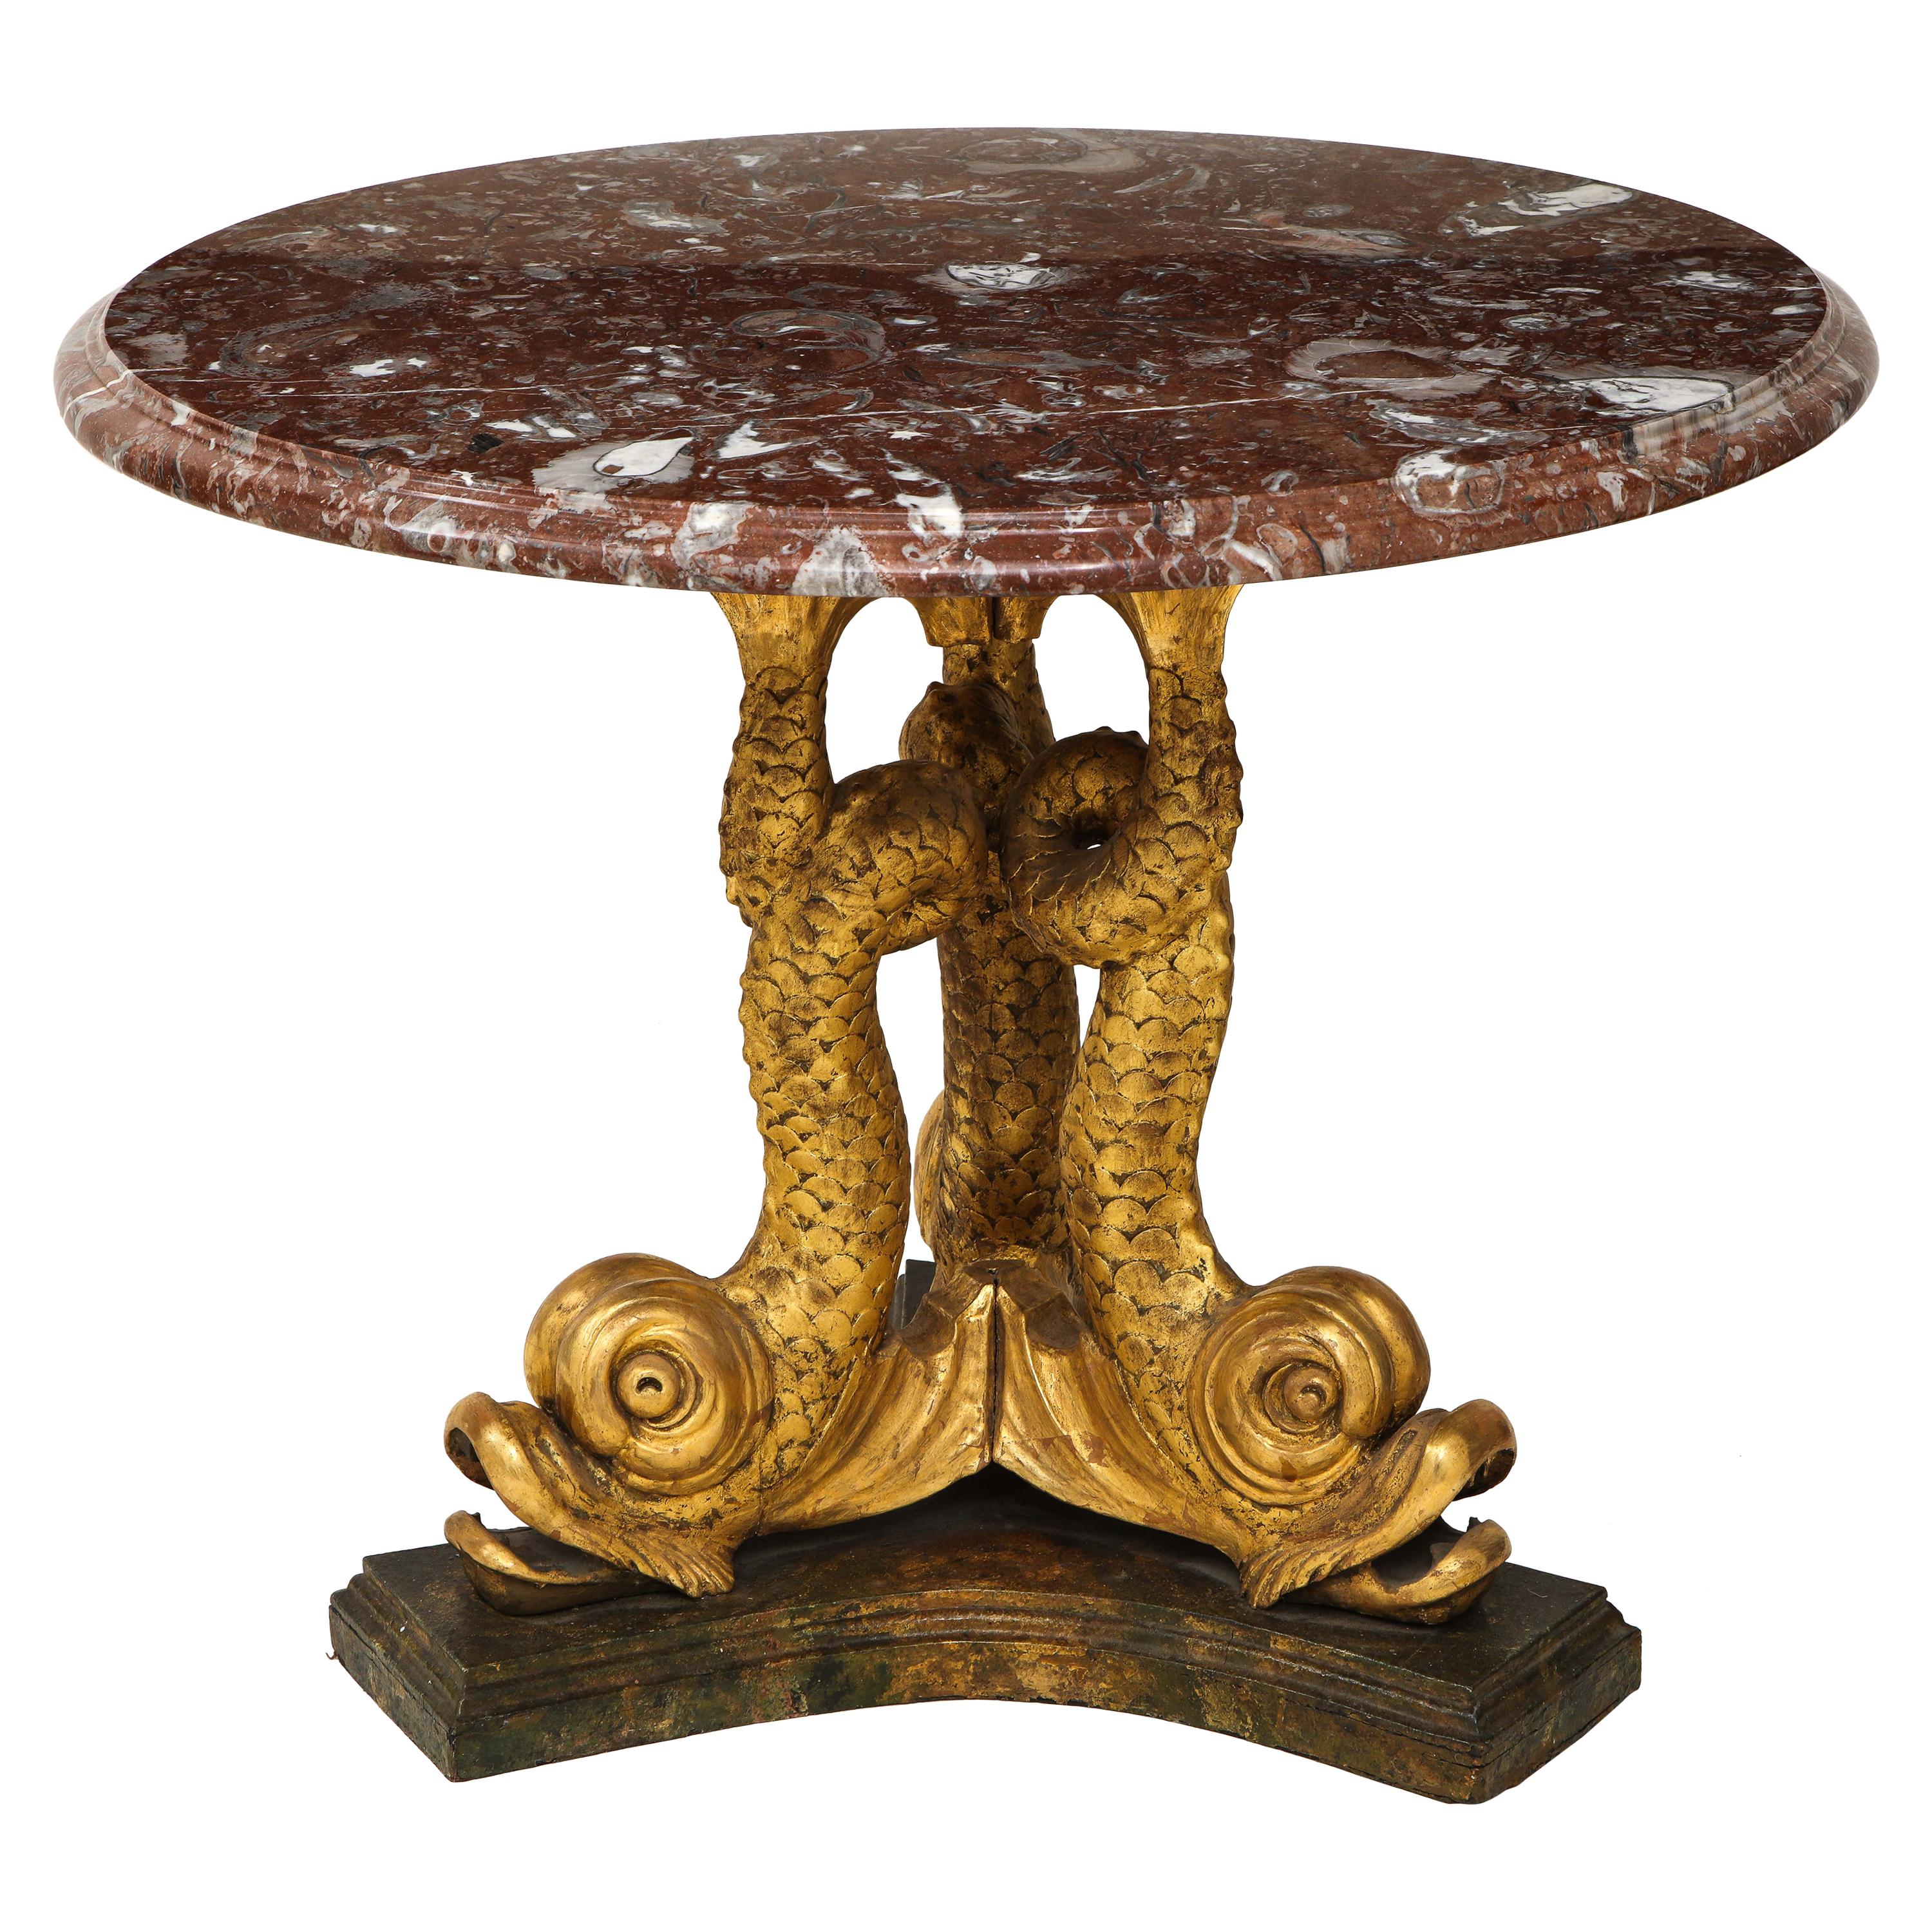 Regency Style Marble and Gilt Gesso Dolphin Center Table